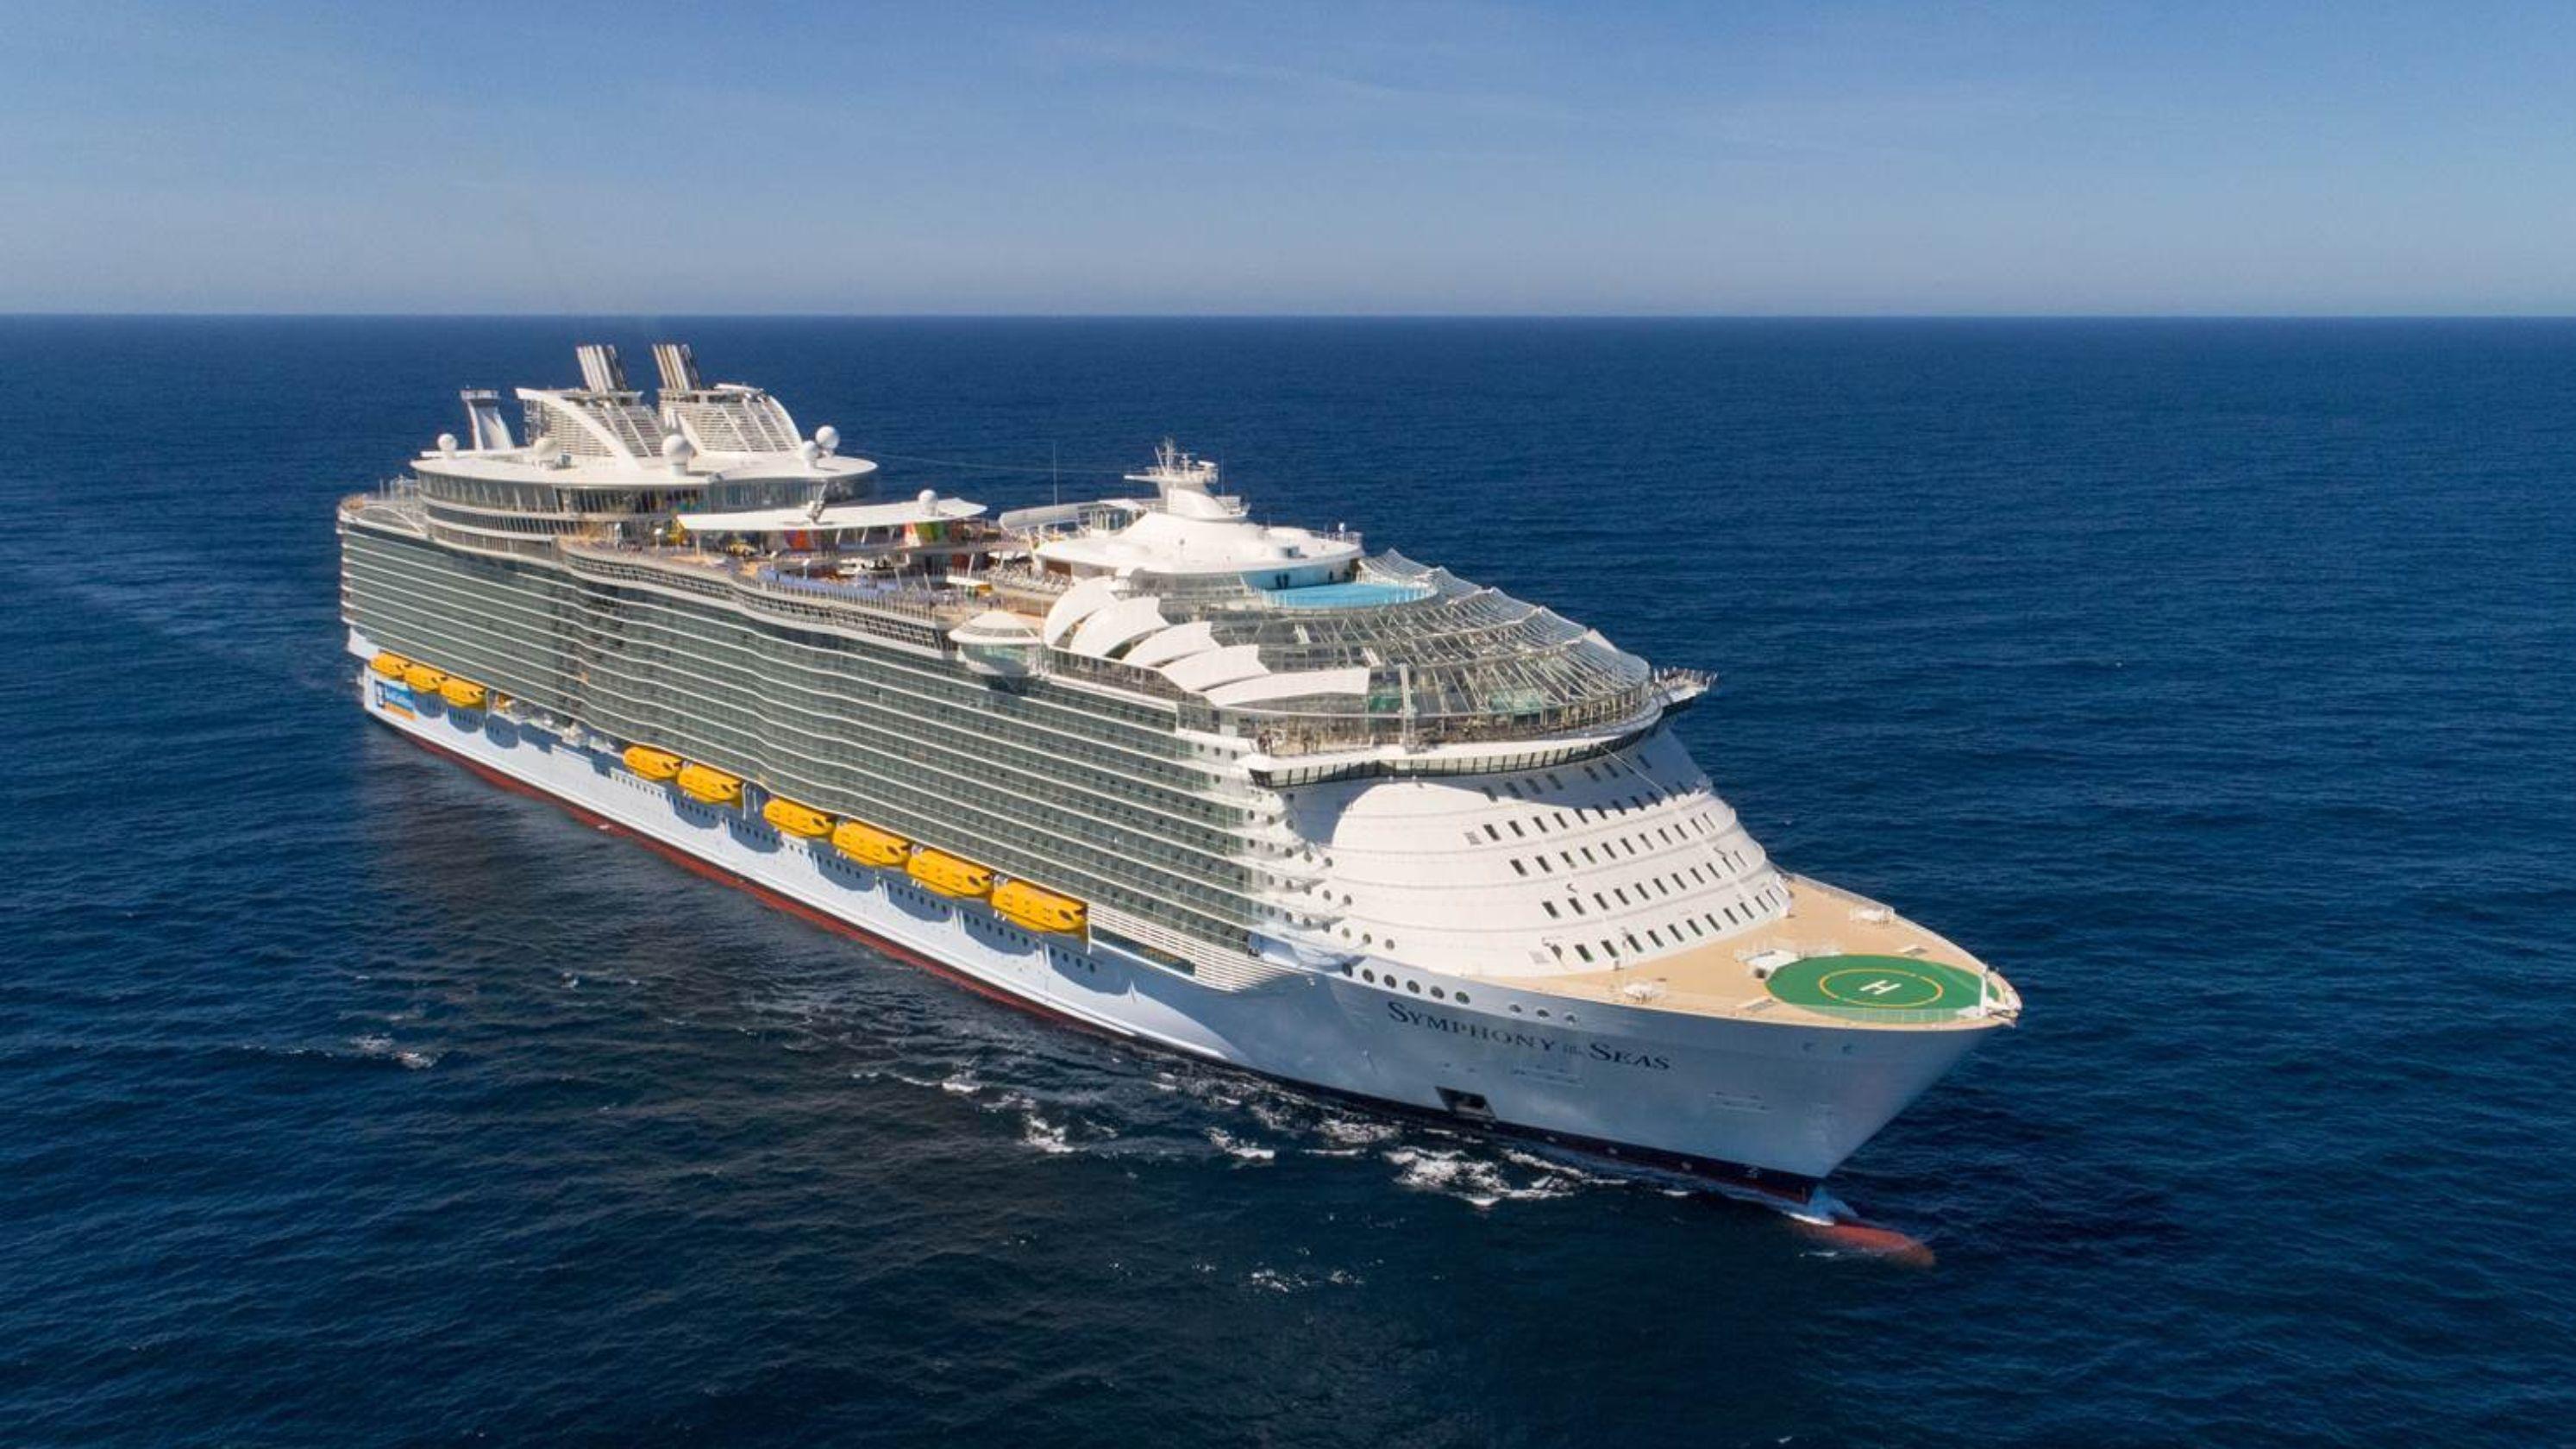 Cozumel welcomes “Symphony of the seas” the largest cruise ship in the